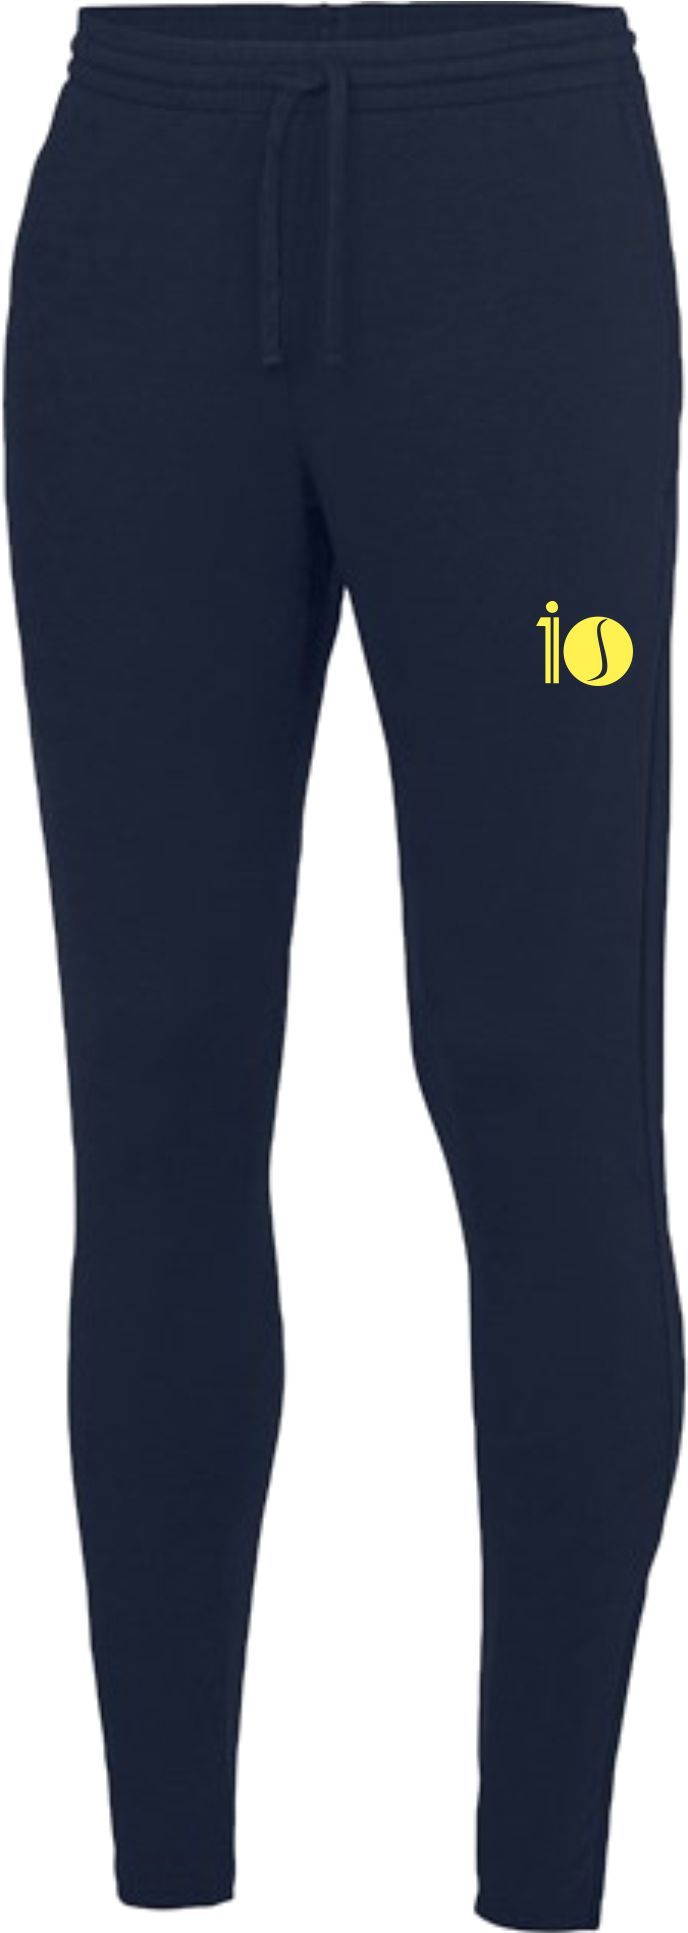 10is Academy Cool Tapered Jog Pants (unisex)